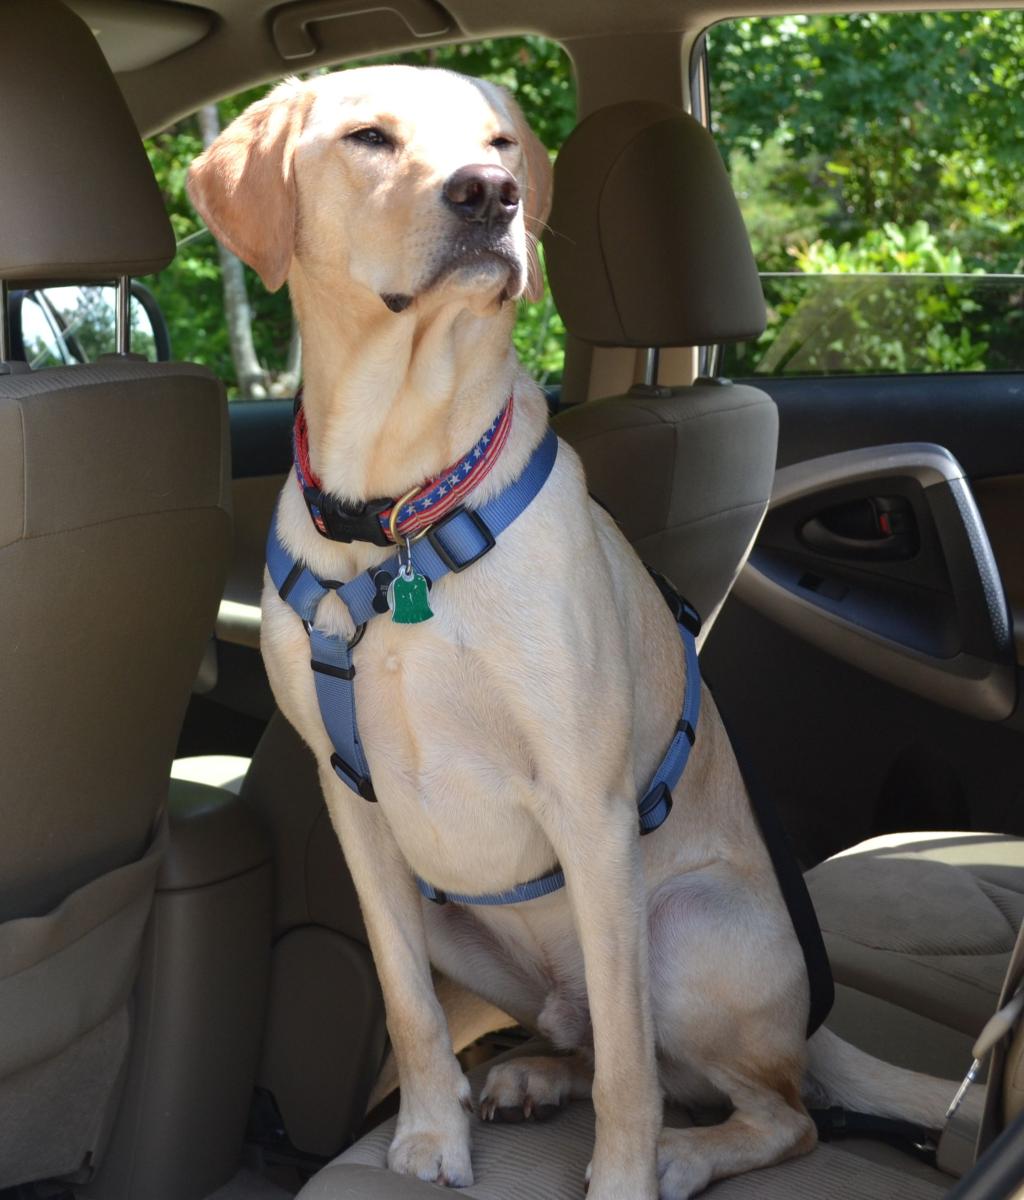 how to take dog hair out of car seats